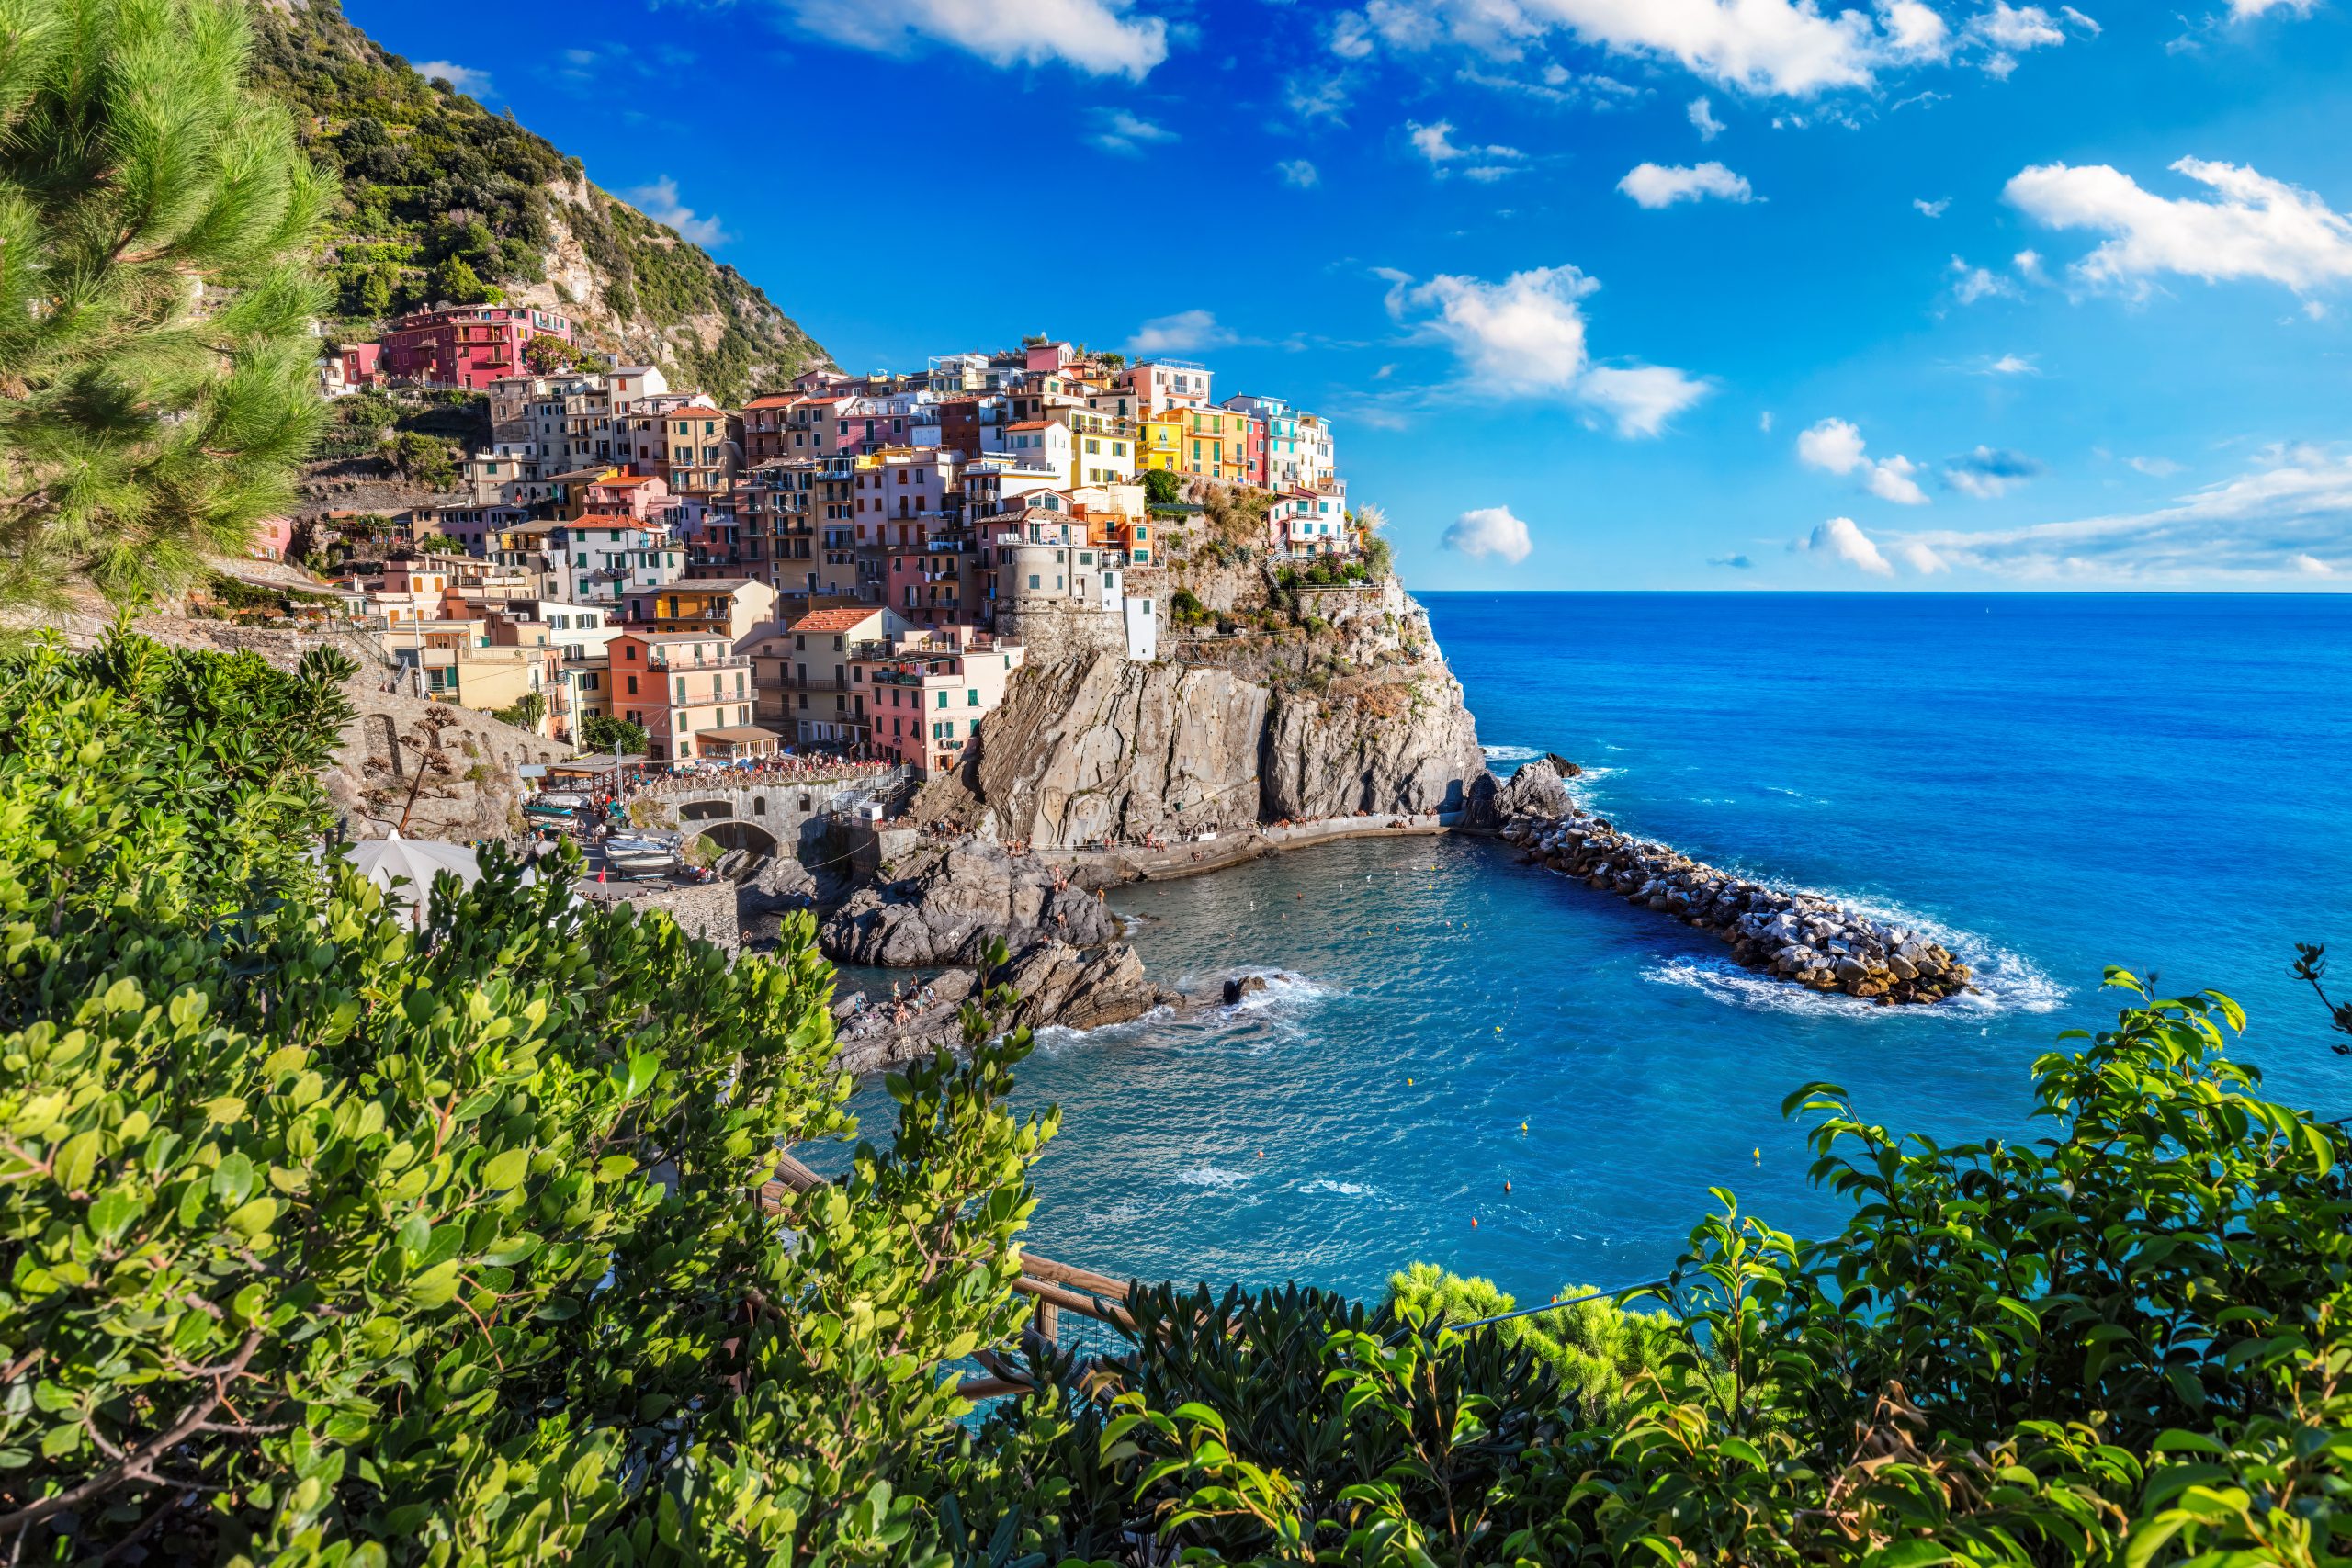 HIKING THROUGH THE MARVELS OF CINQUE TERRE NATIONAL PARK